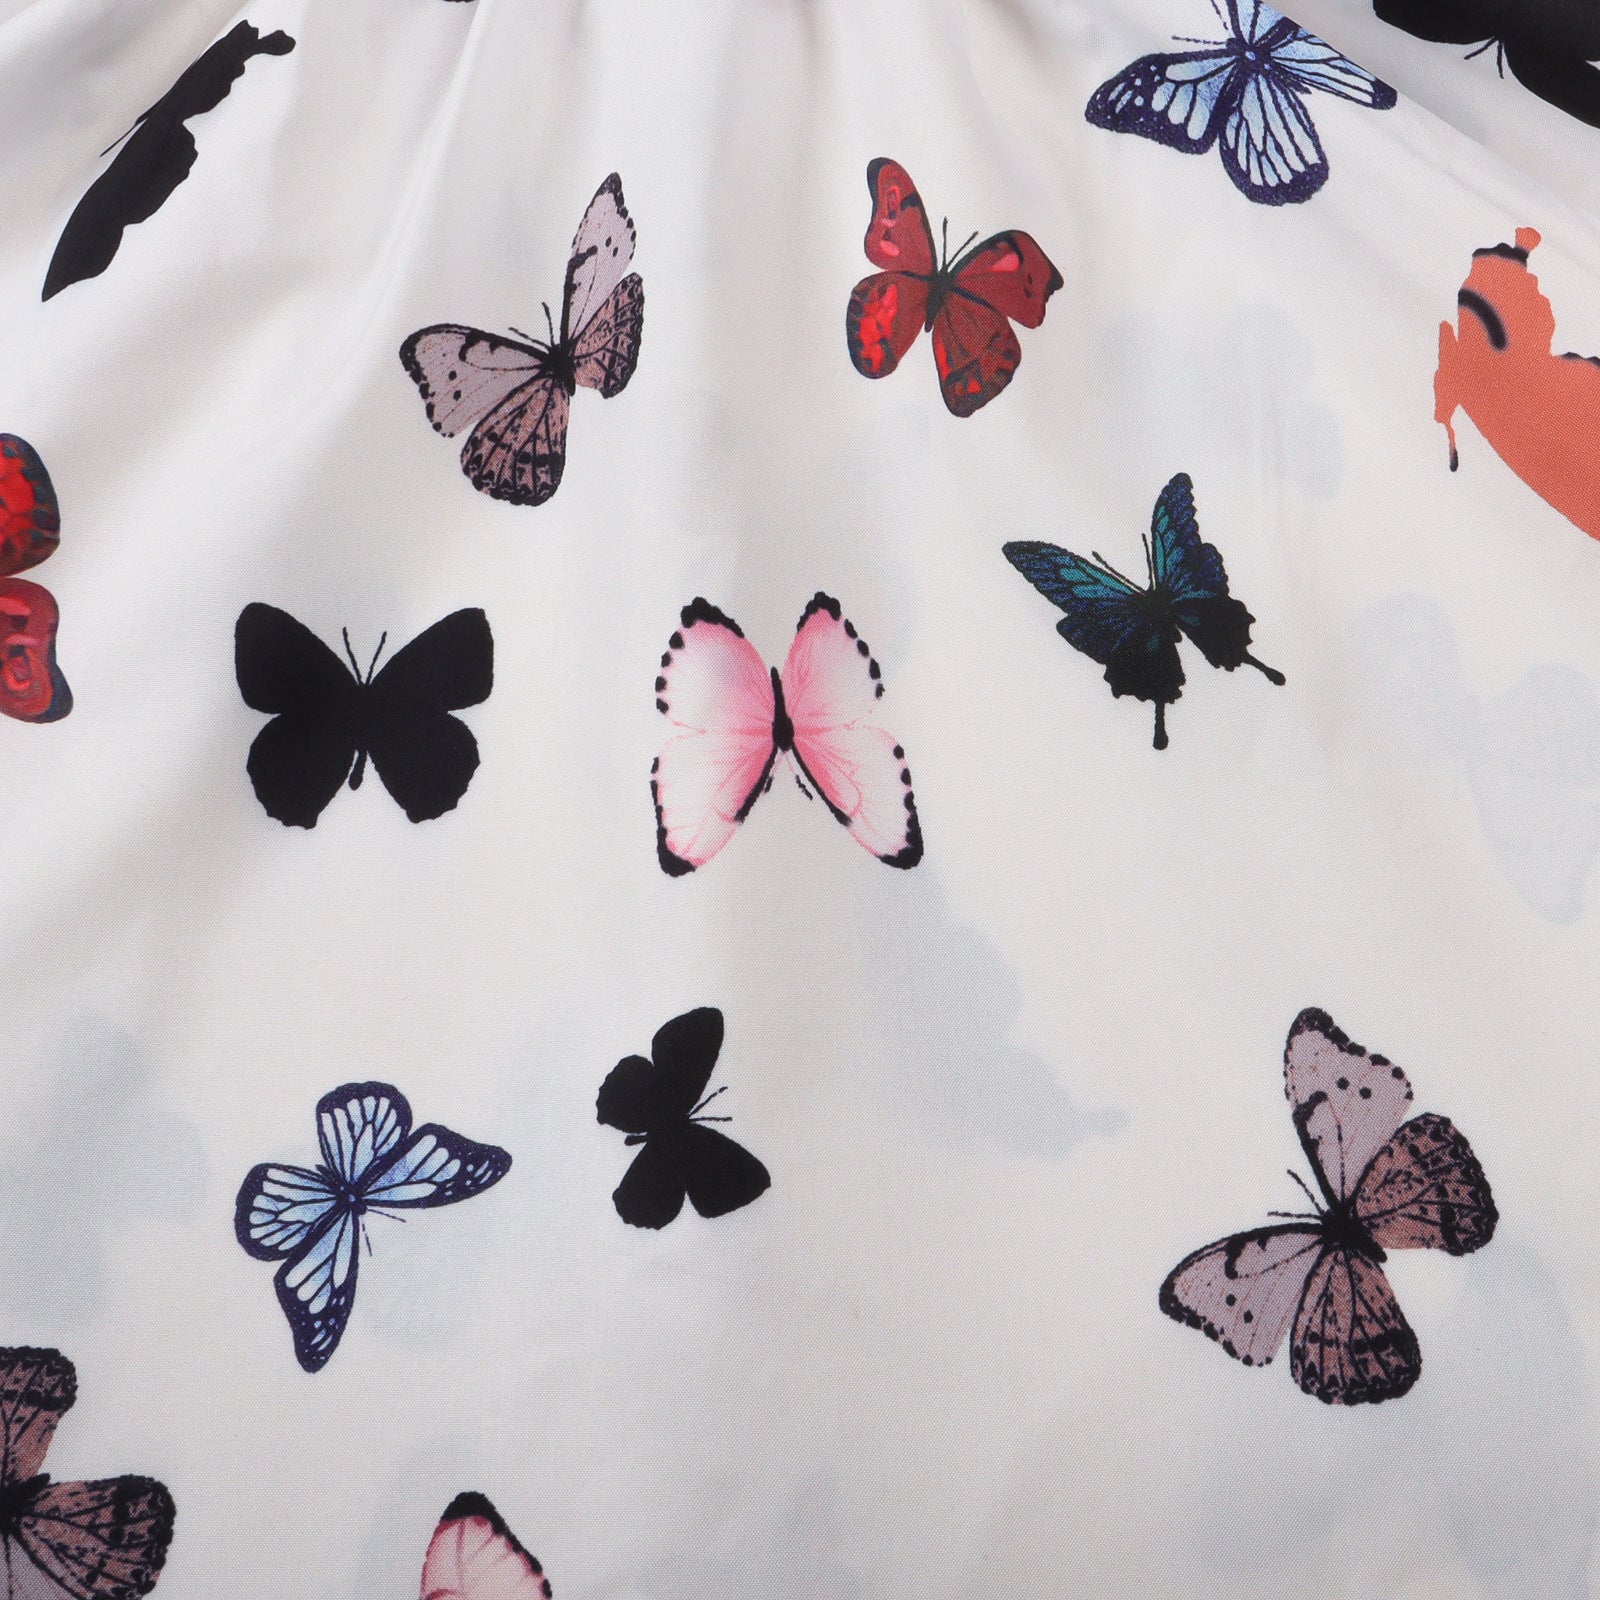 Mom and Me Matching Butterfly Print Dresses